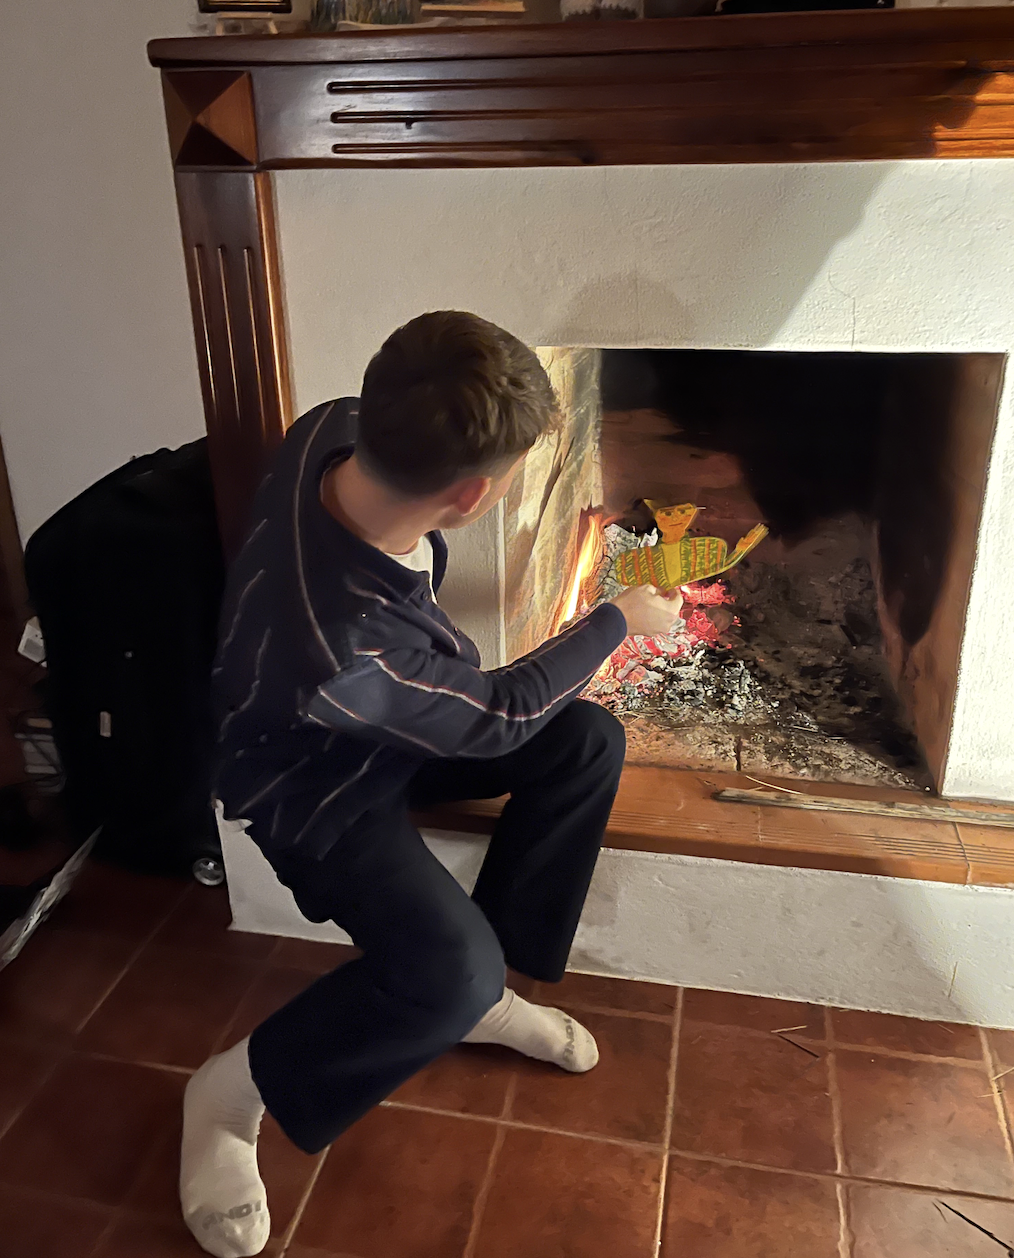 Eamon participating in the Ecuadorian tradition of making a paper doll of himself and burning it on New Year's Eve.